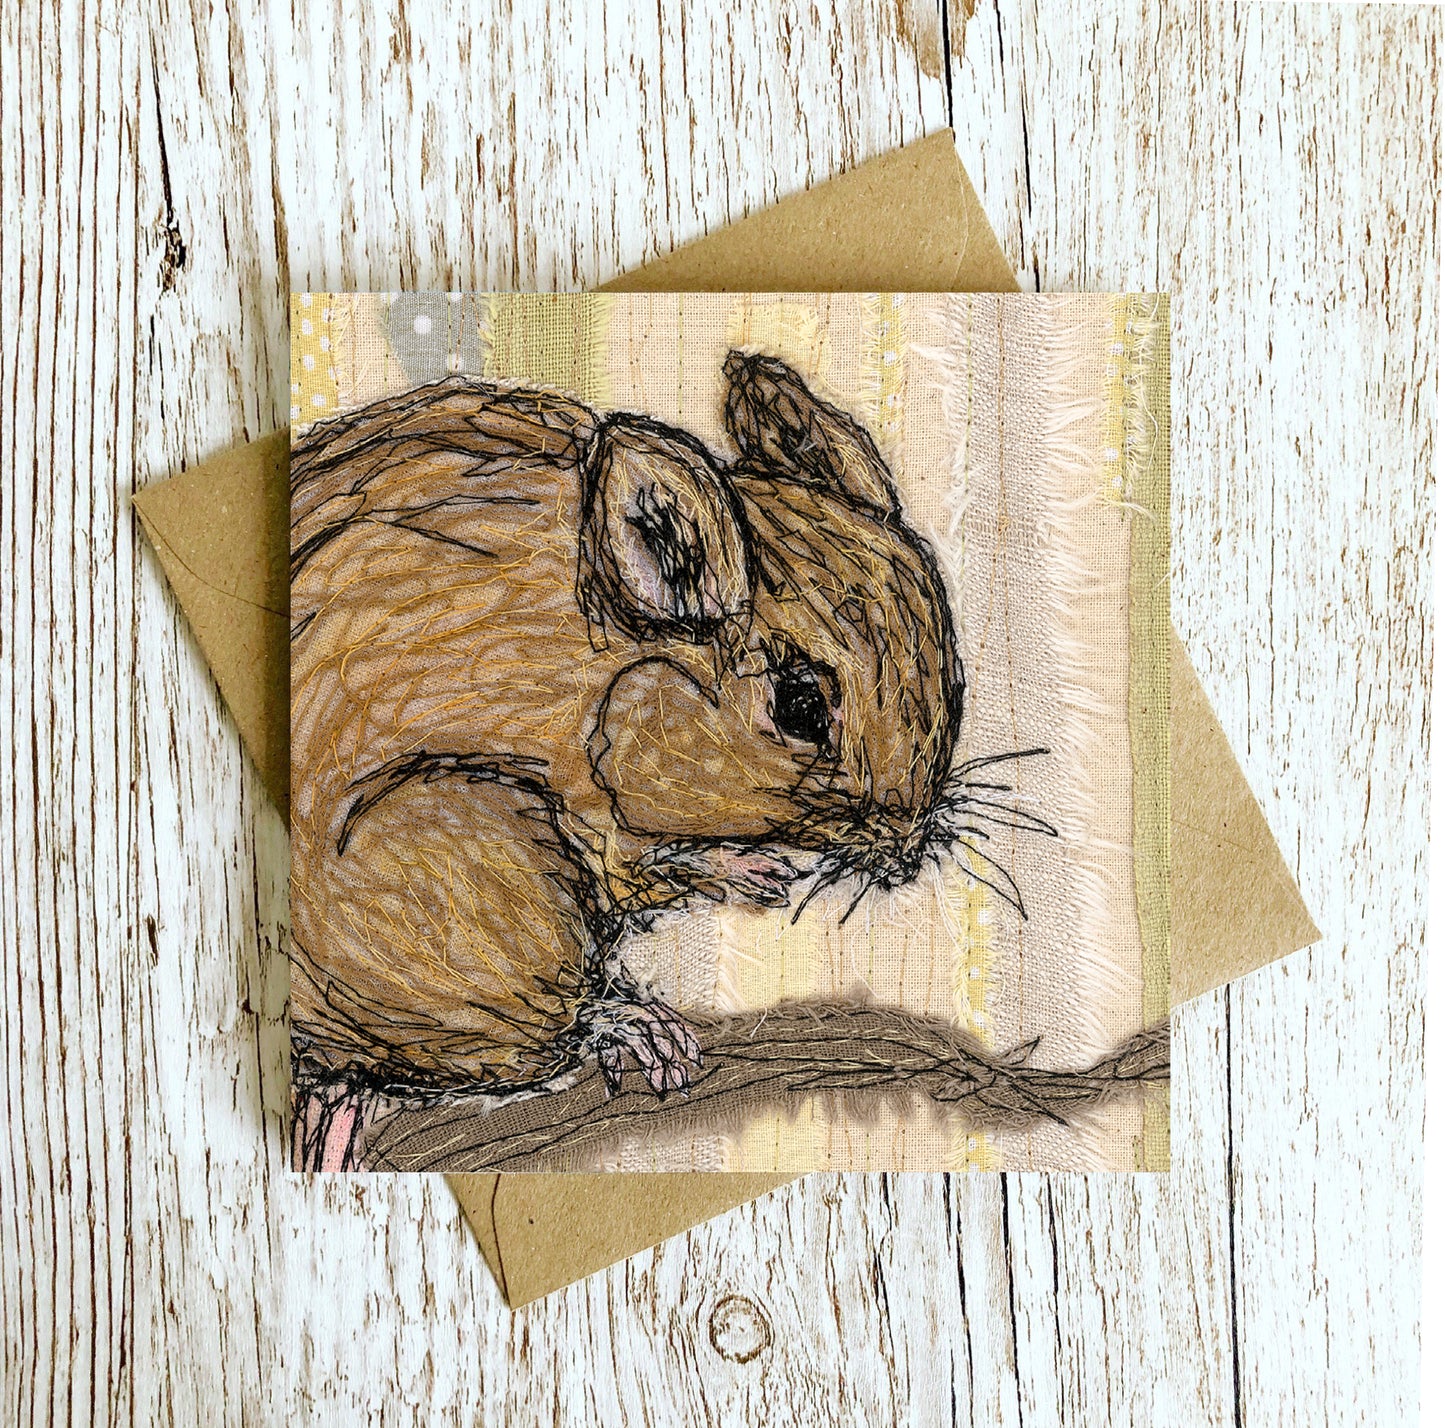 Harvest Mouse Embroidery Art Card